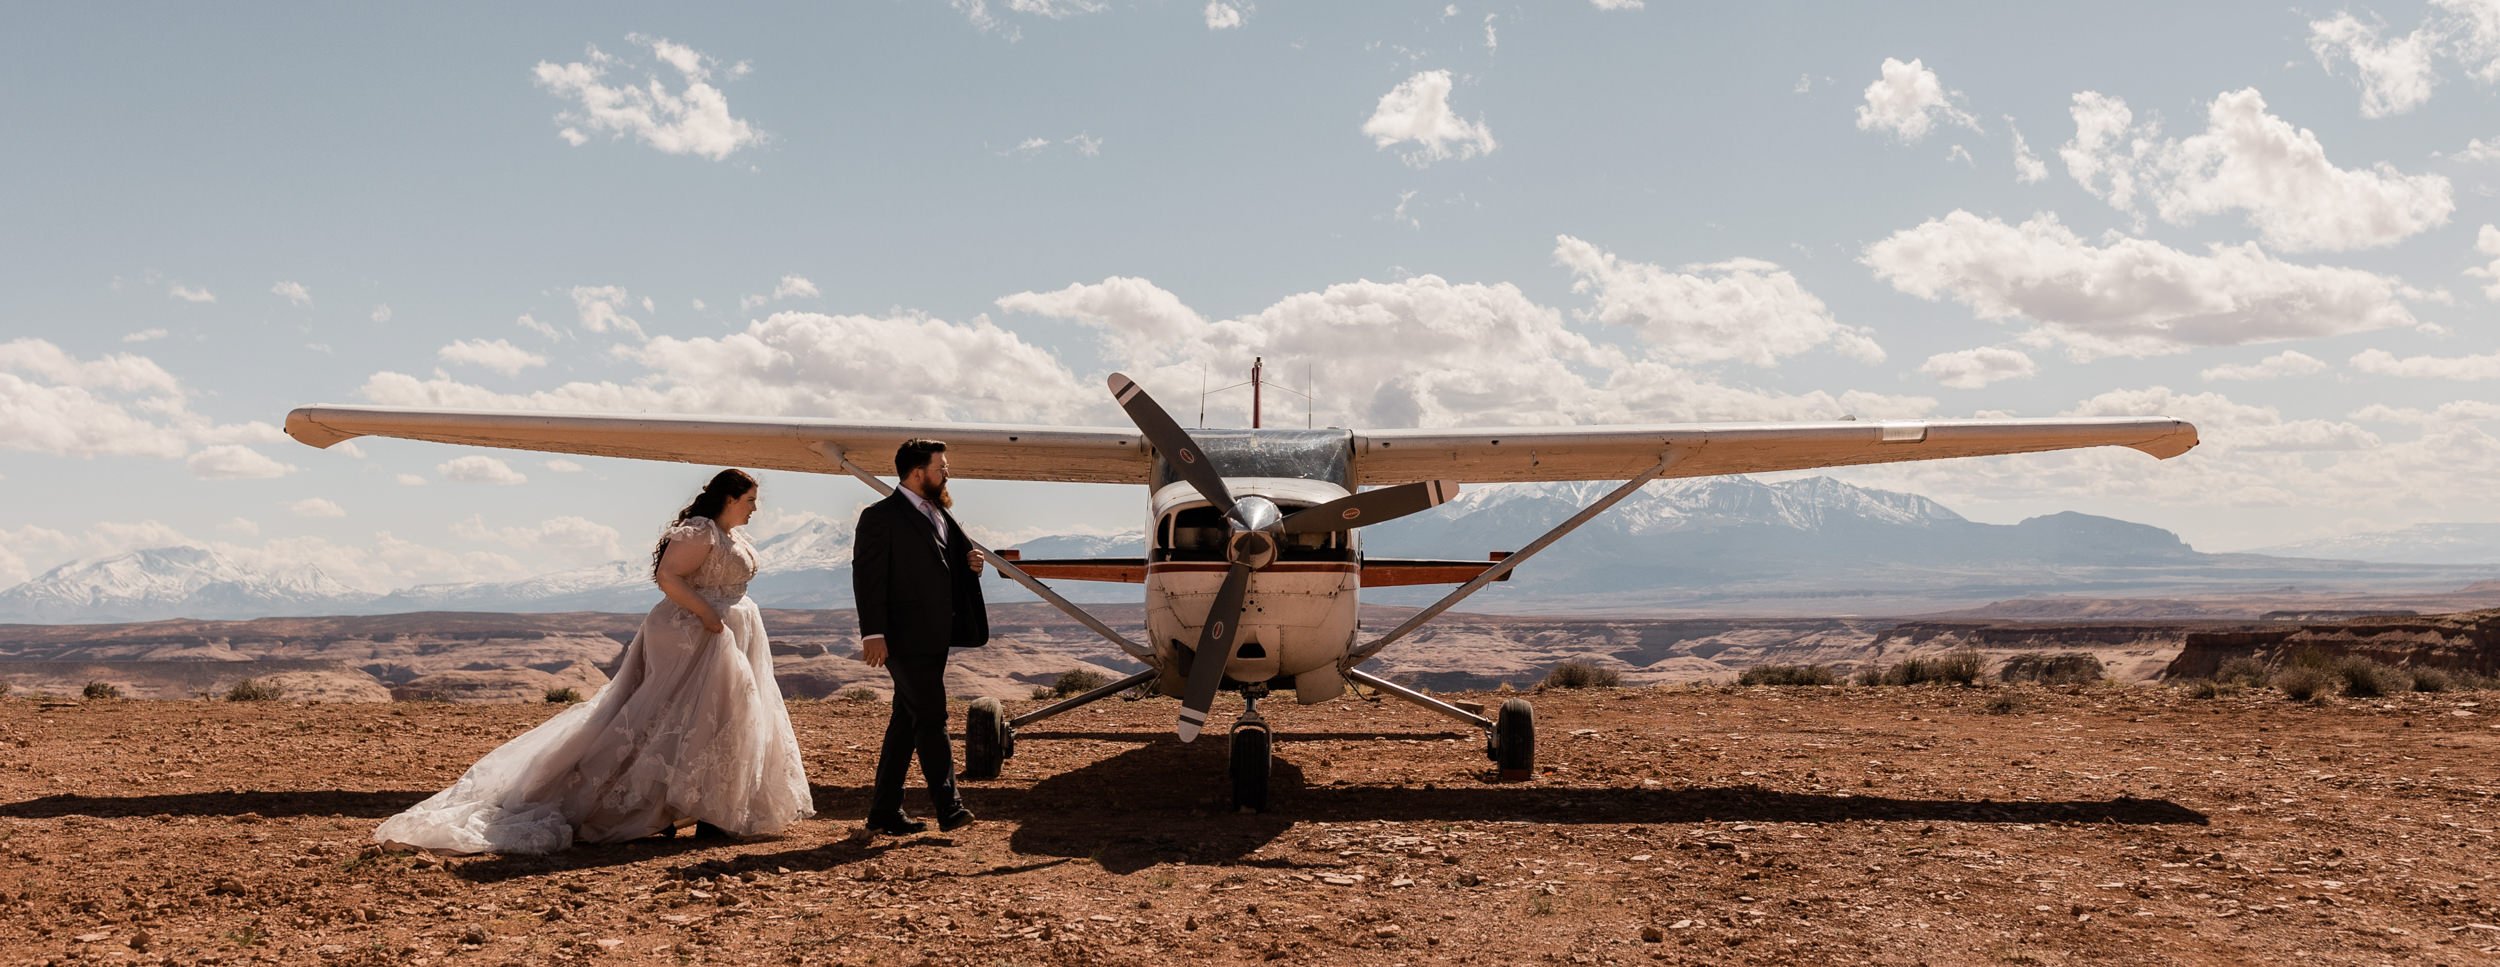 Back Country Airplane Wedding in Utah | The Hearnes Elopement Photography